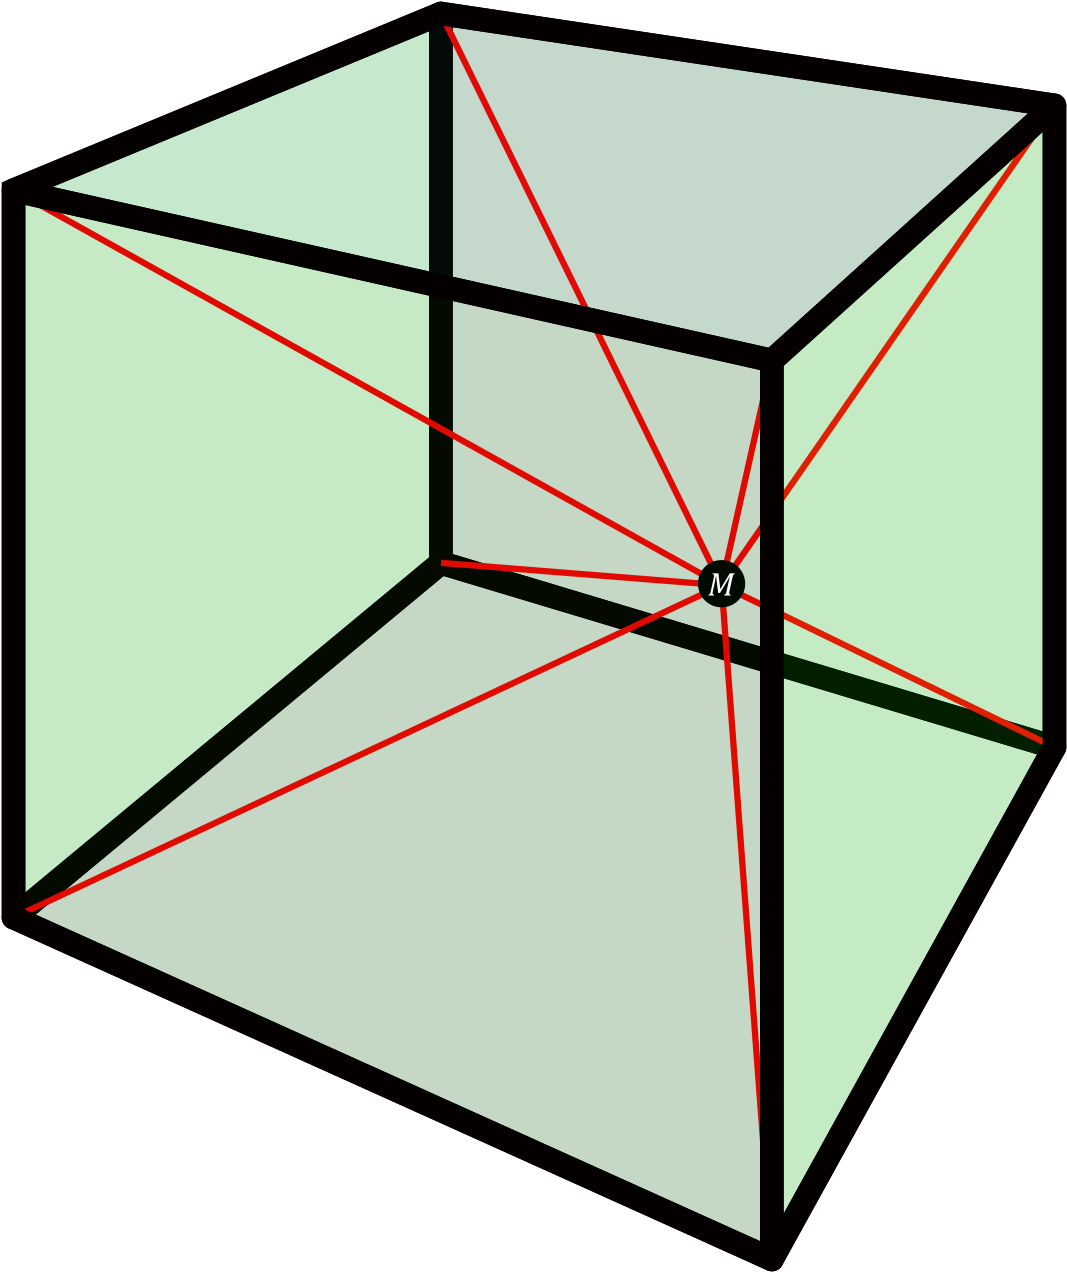 A Green Cube With Red Lines